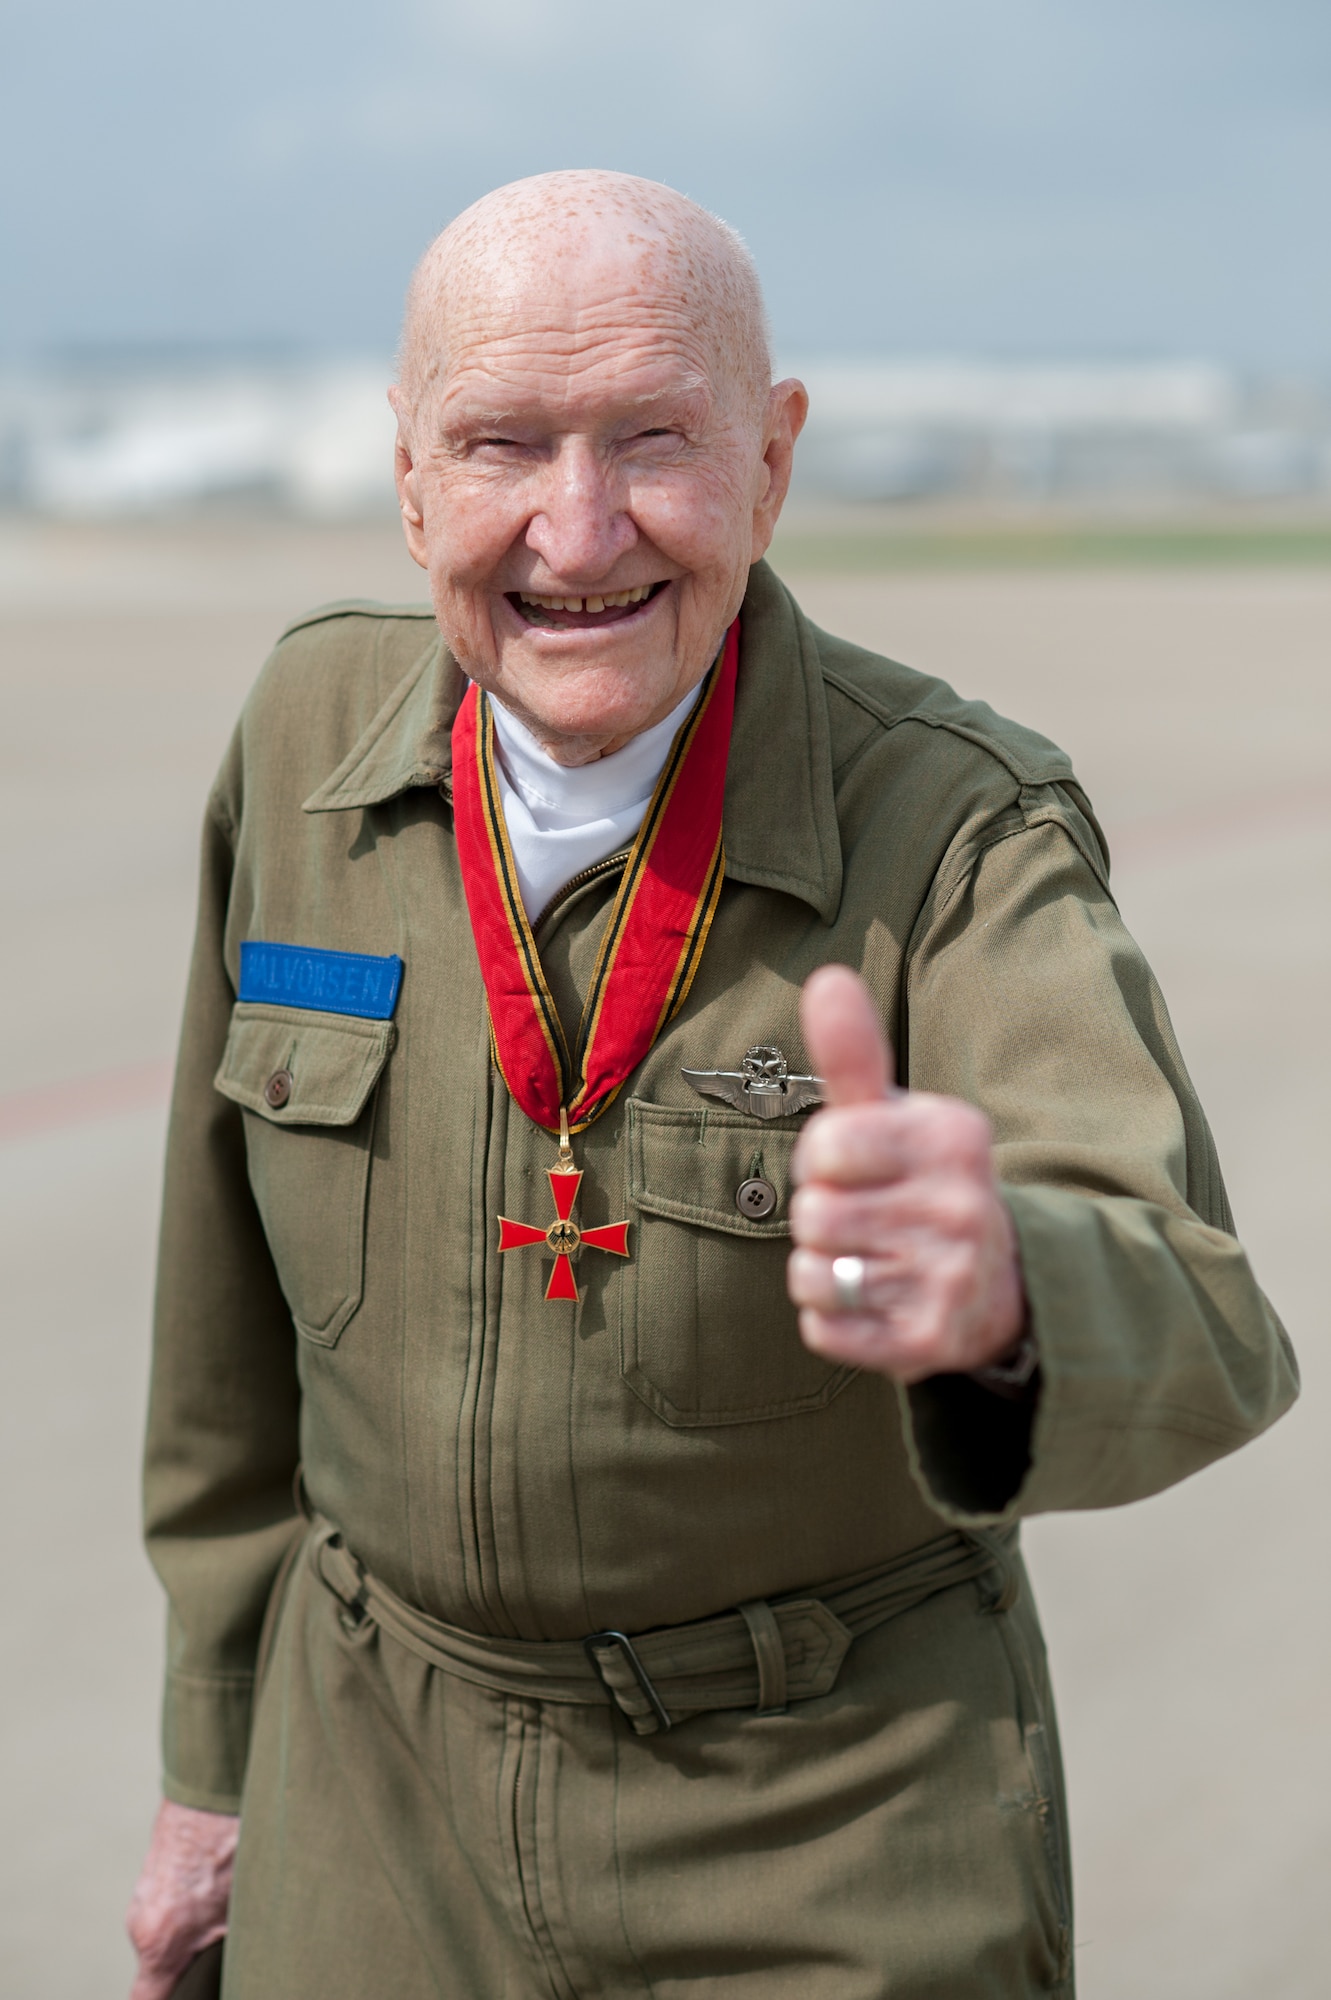 Col. Gail Halvorsen, a former U.S. Army Air Corps pilot who originated the idea of airdropping candy to German children during the 1948-49 Berlin Airlift, visits the Kentucky Air National Guard Base in Louisville, Ky., April 17, 2015. Halvorsen, who is known as the Berlin Candy Bomber, will be the guest of honor during the 2015 Thunder Over Louisville air show April 18. (U.S. Air National Guard photo by Maj. Dale Greer)